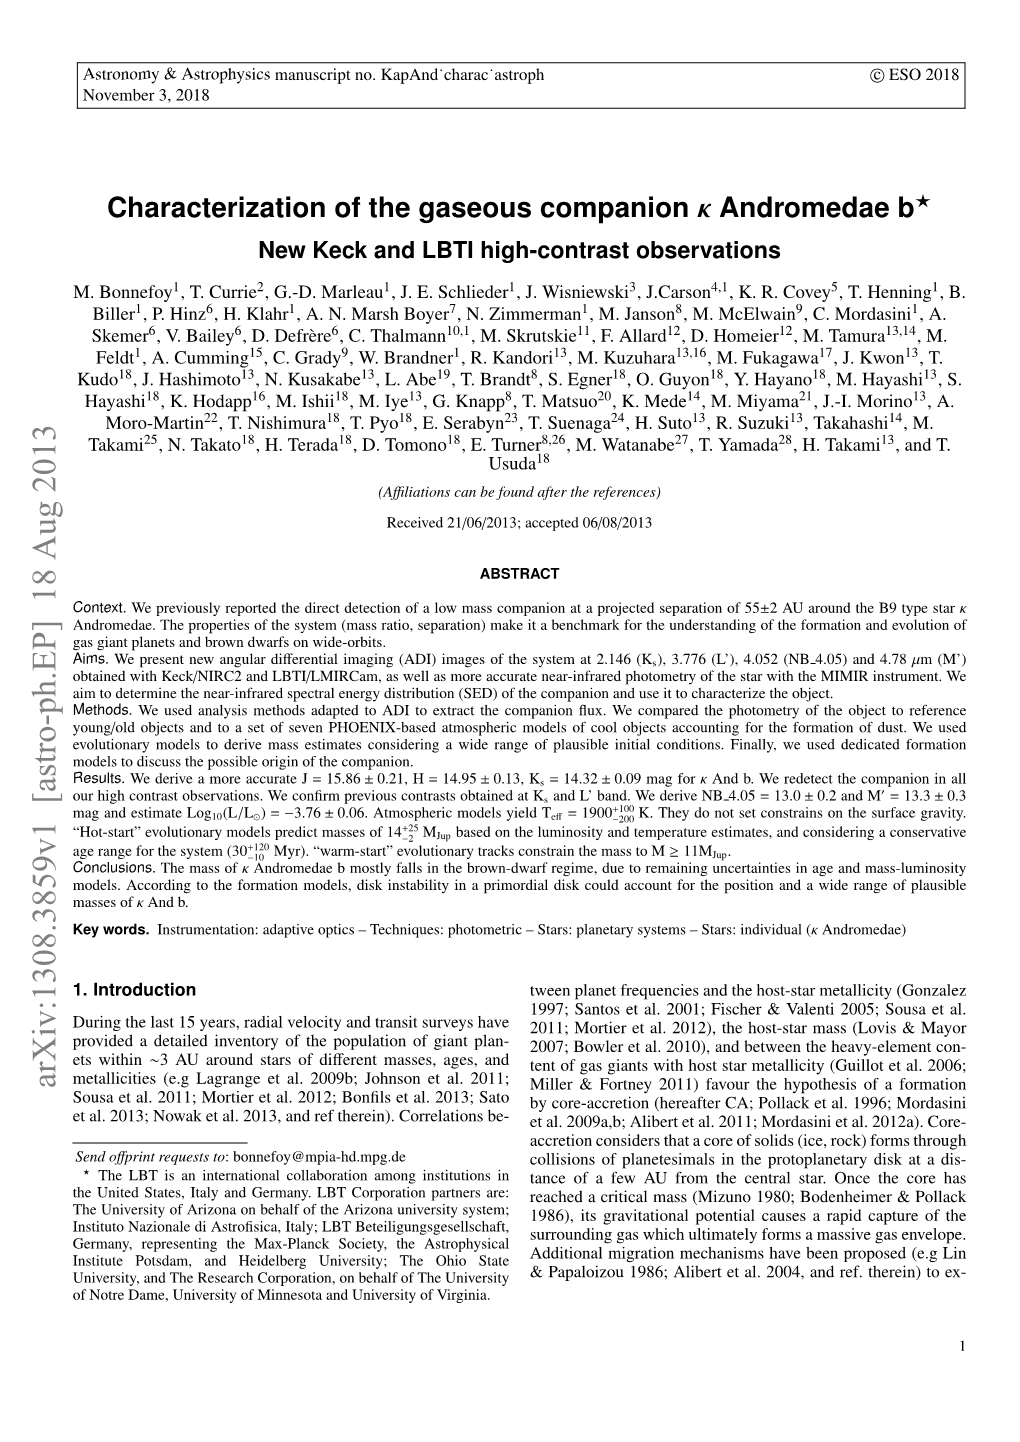 Characterization of the Gaseous Companion Κ Andromedae B? New Keck and LBTI High-Contrast Observations